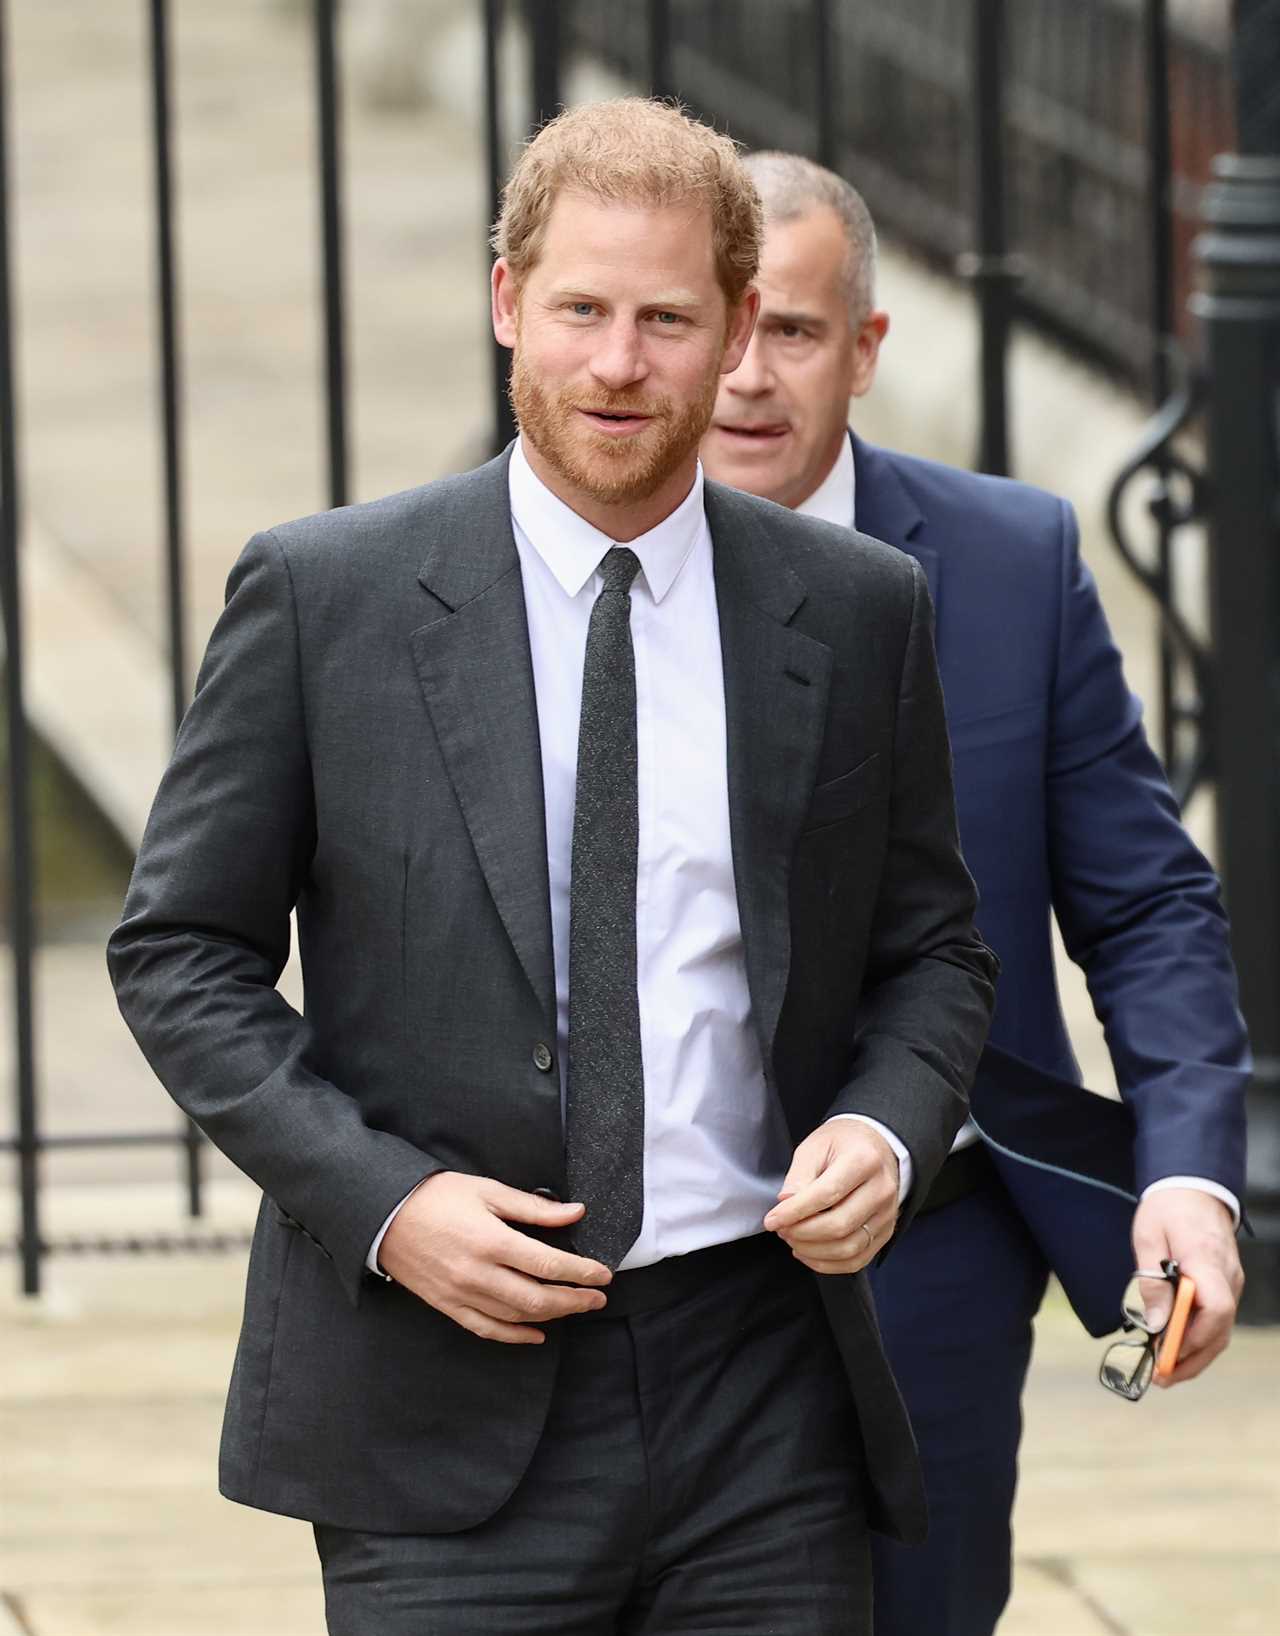 Where will Prince Harry stay during the coronation?